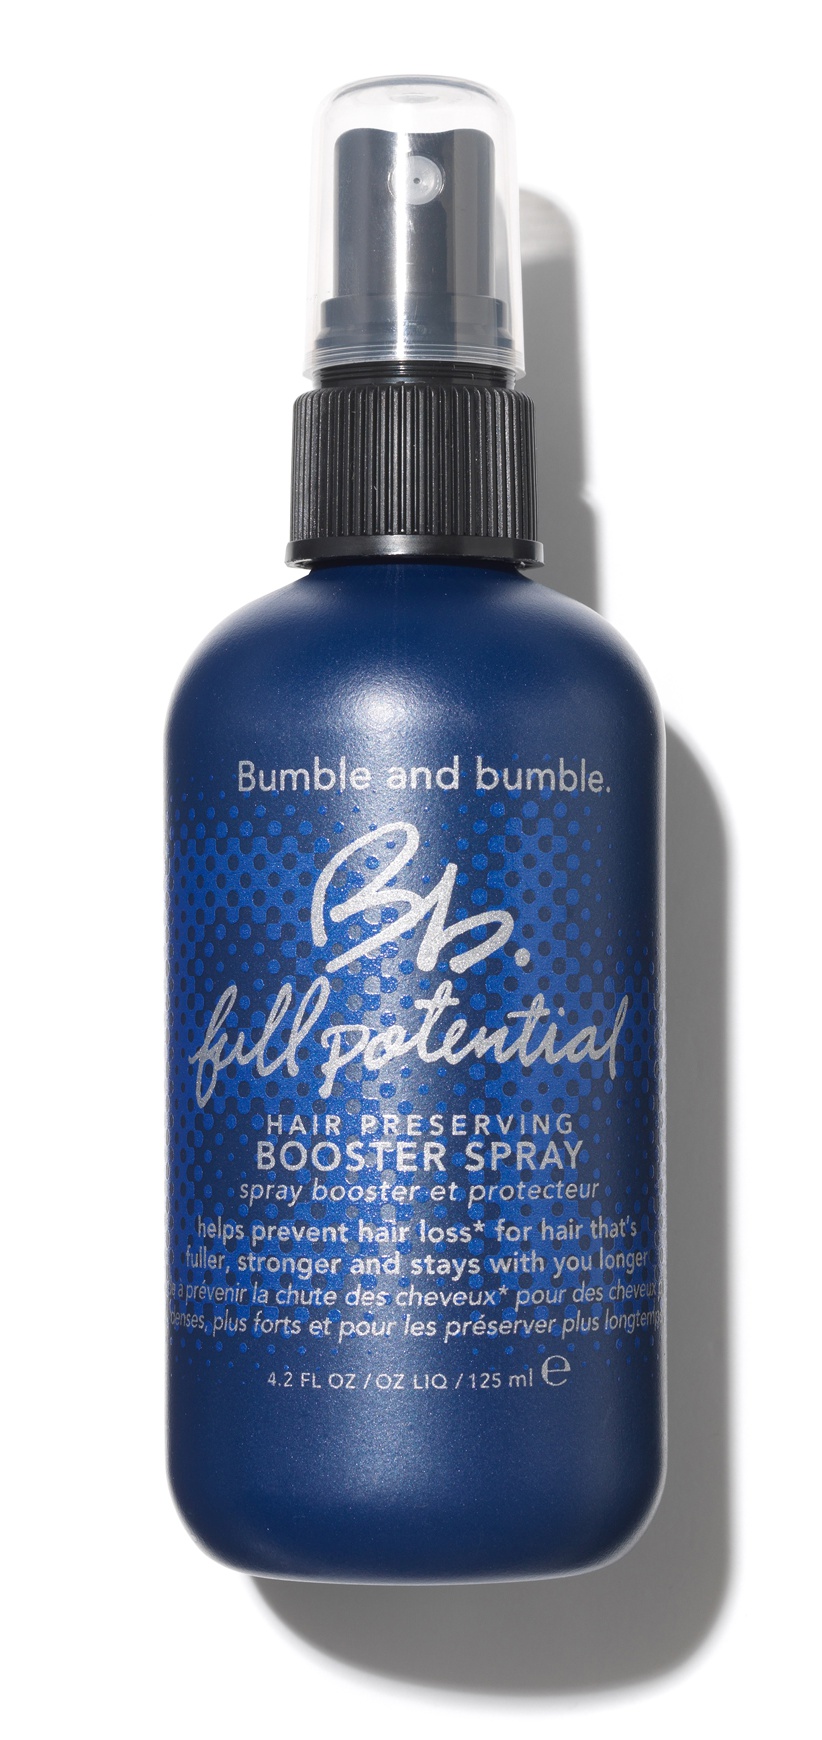 Bumble & Bumble BB.Full Potential Booster Spray